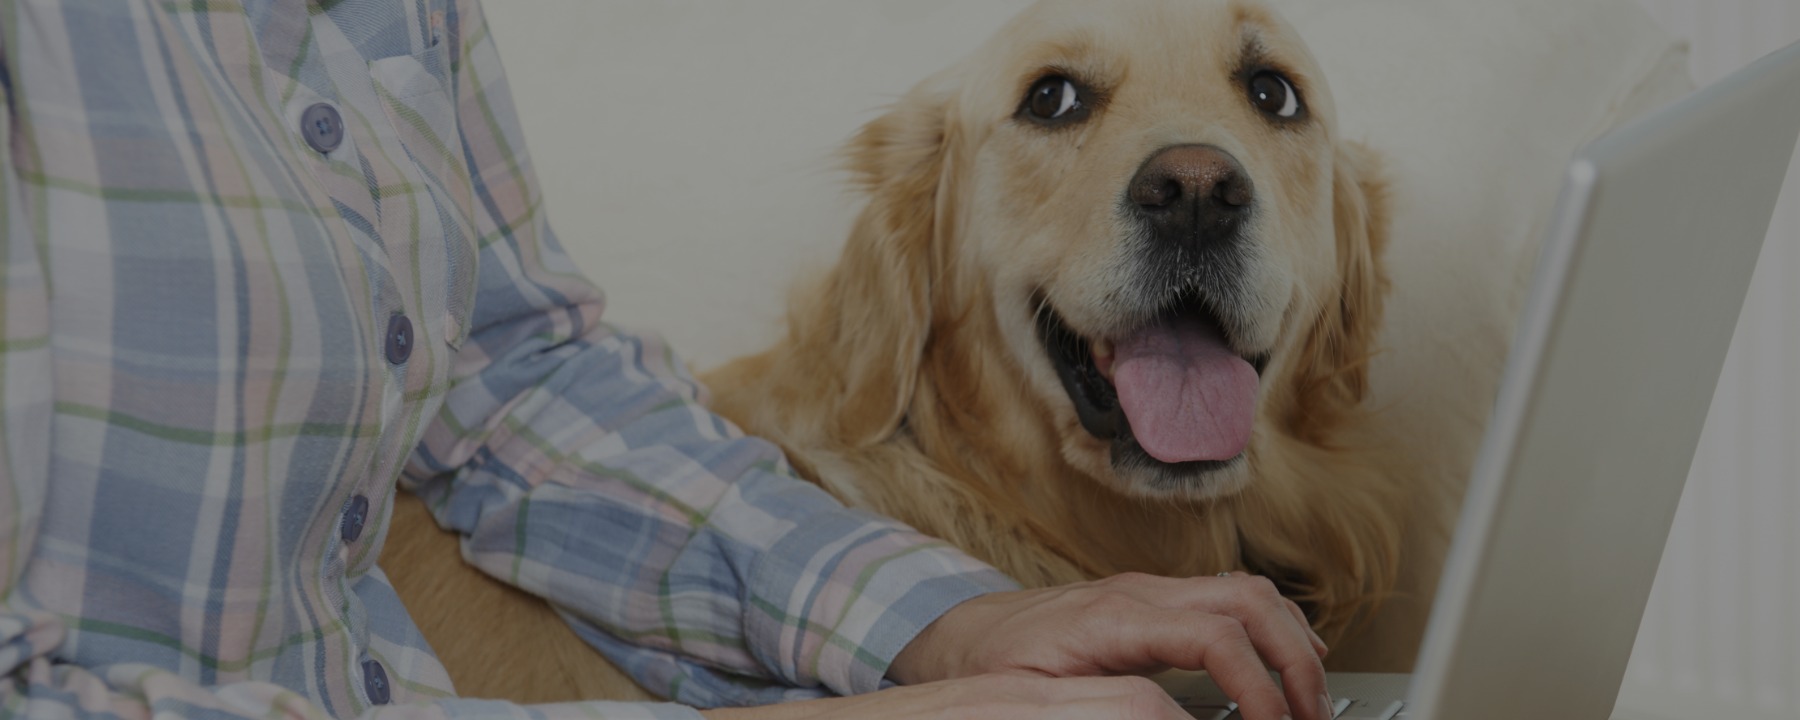 6 Perks of Taking a Dog Grooming Course Online